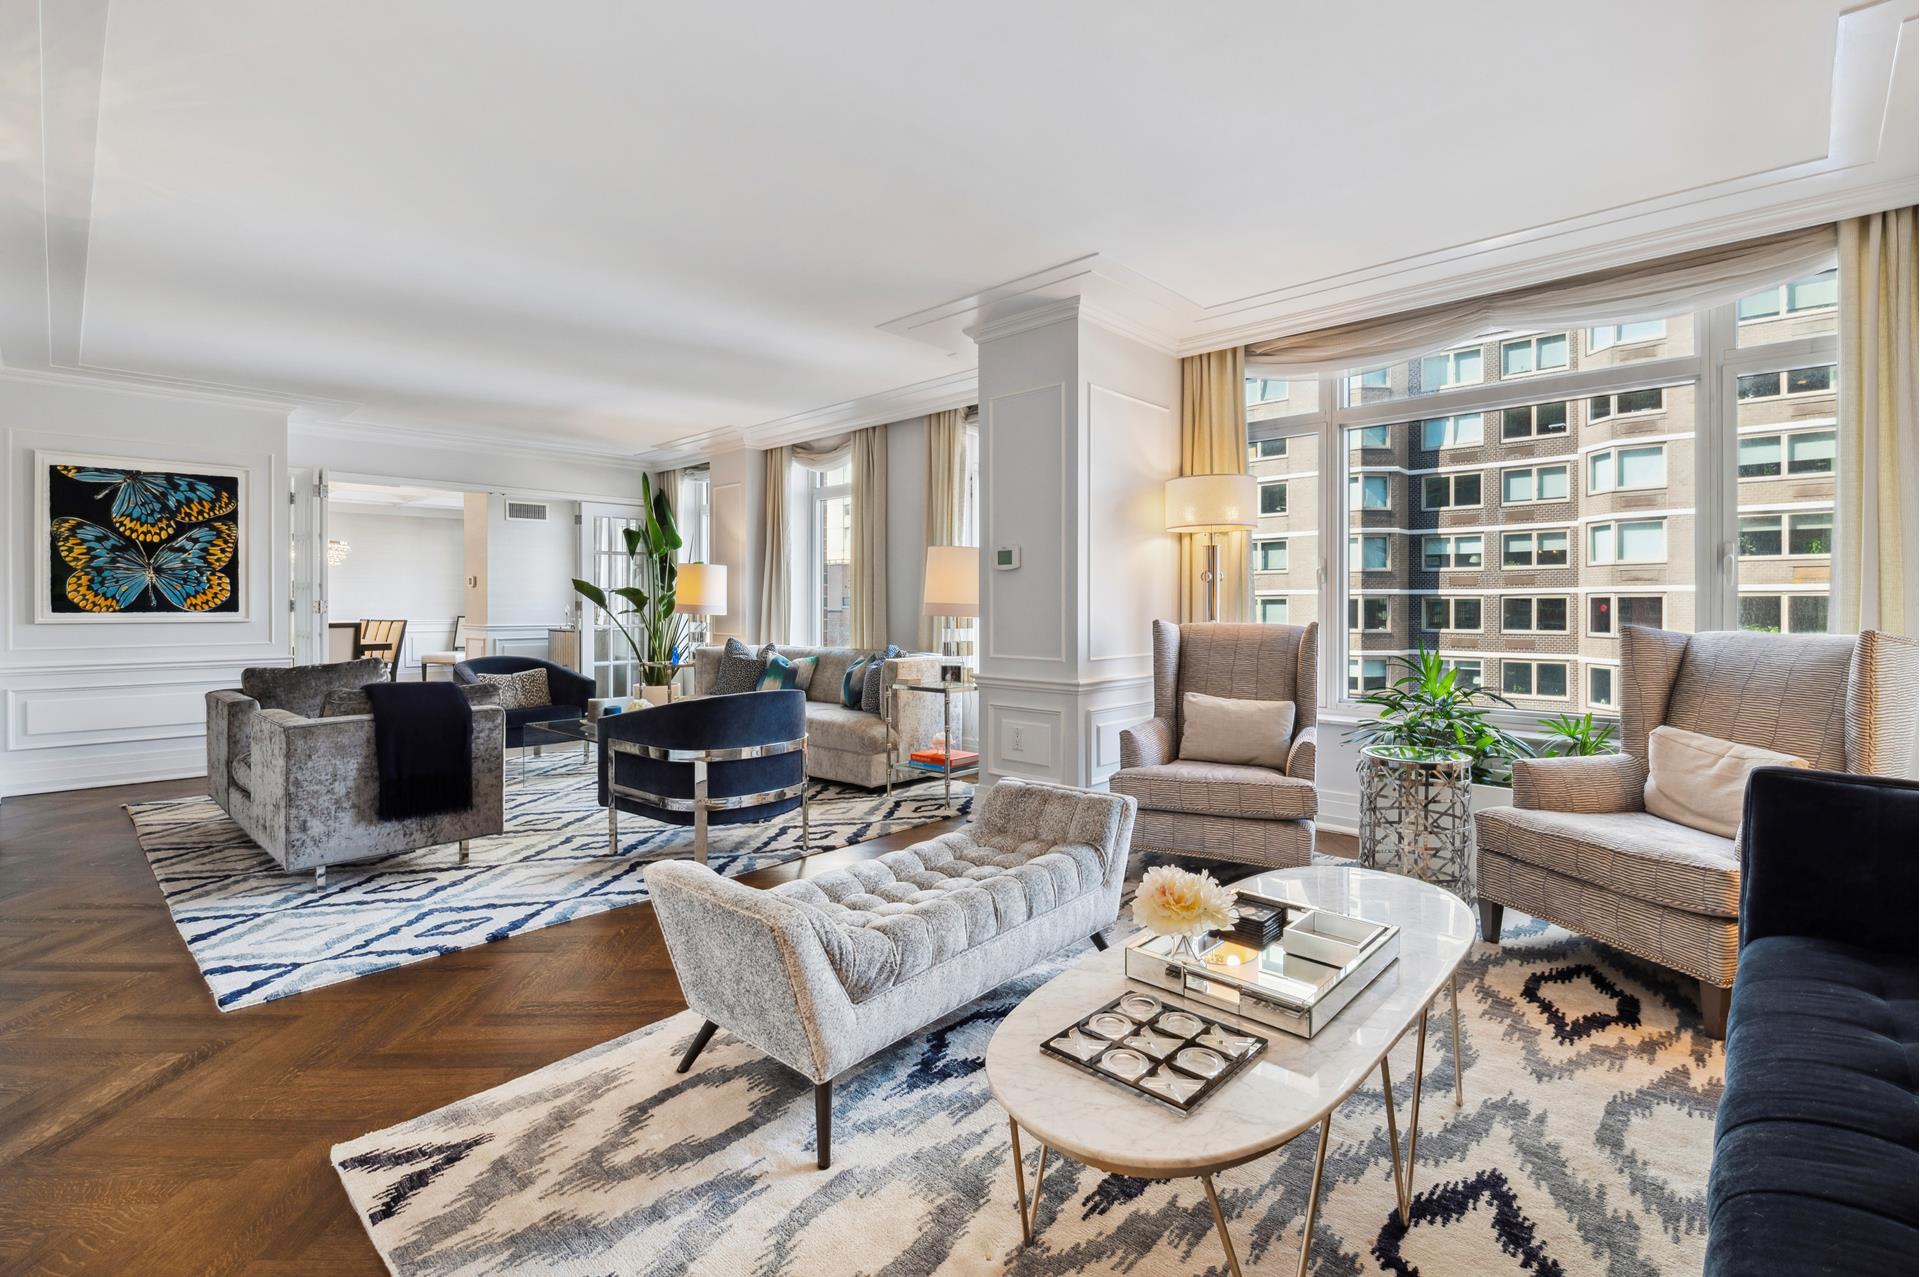 205 East 85th Street 8C, Yorkville, Upper East Side, NYC - 5 Bedrooms  
6.5 Bathrooms  
12 Rooms - 